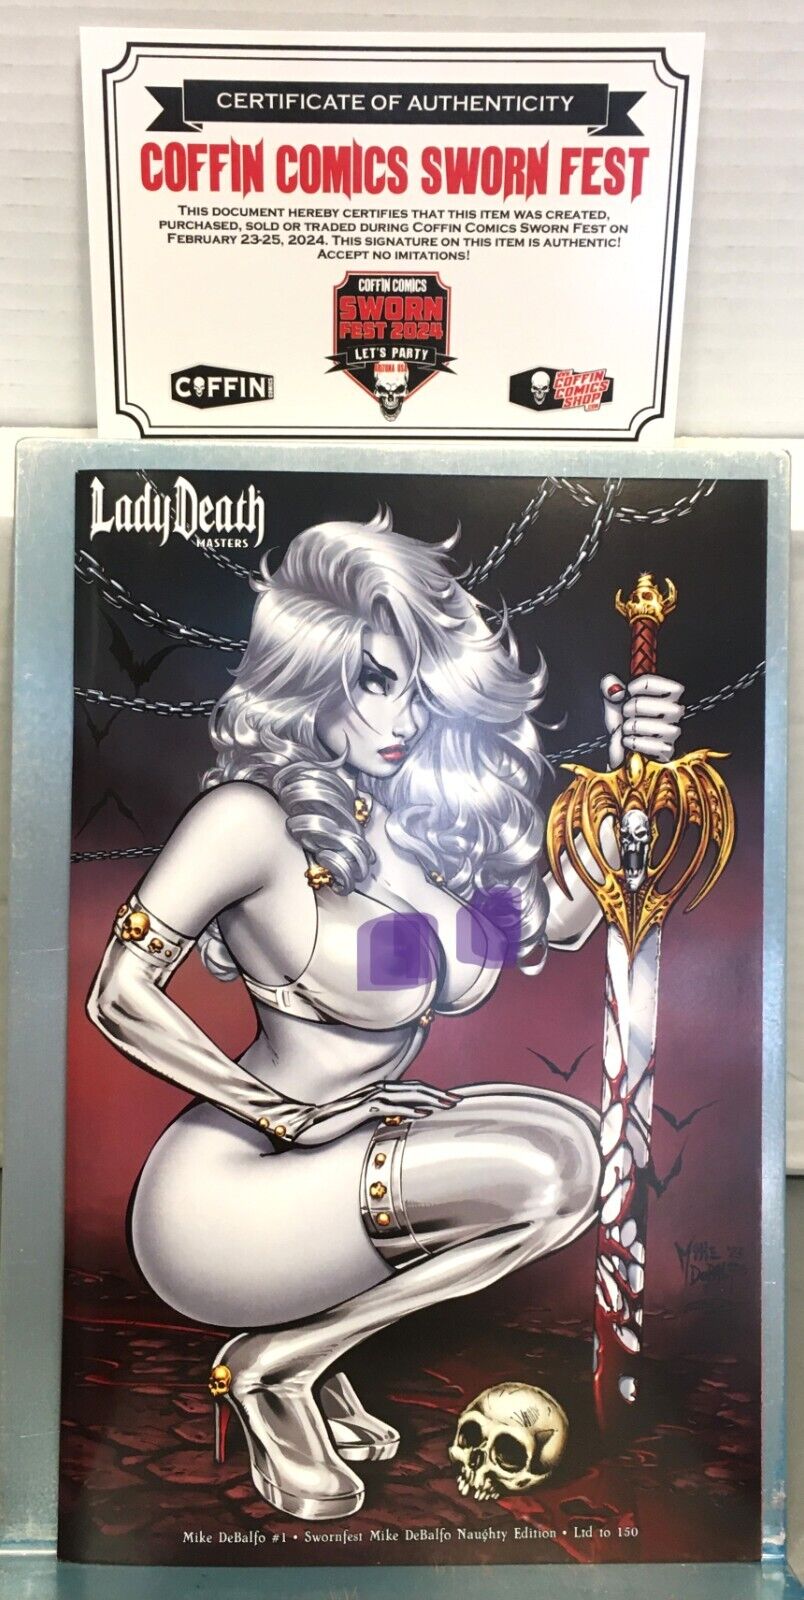 LADY DEATH: MASTERS #1 - SWORNFEST Mike DeBalfo NAUGHTY EDITION - LTD to 150  wh